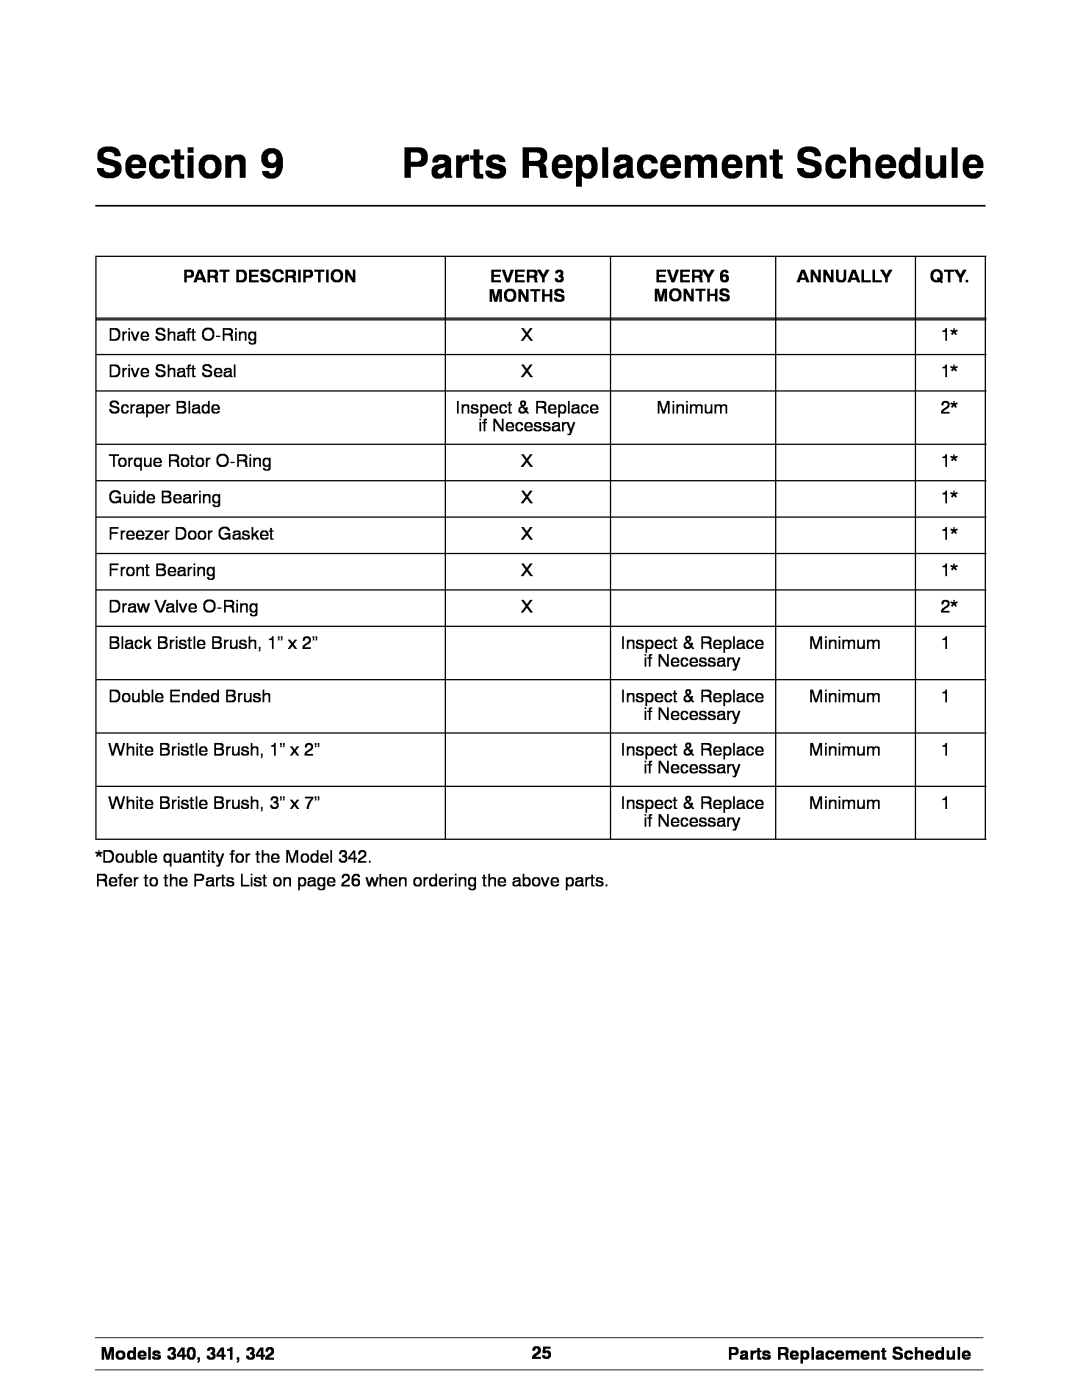 Taylor 342 manual Parts Replacement Schedule, Part Description, Every, Annually, Months, Models 340, 341 